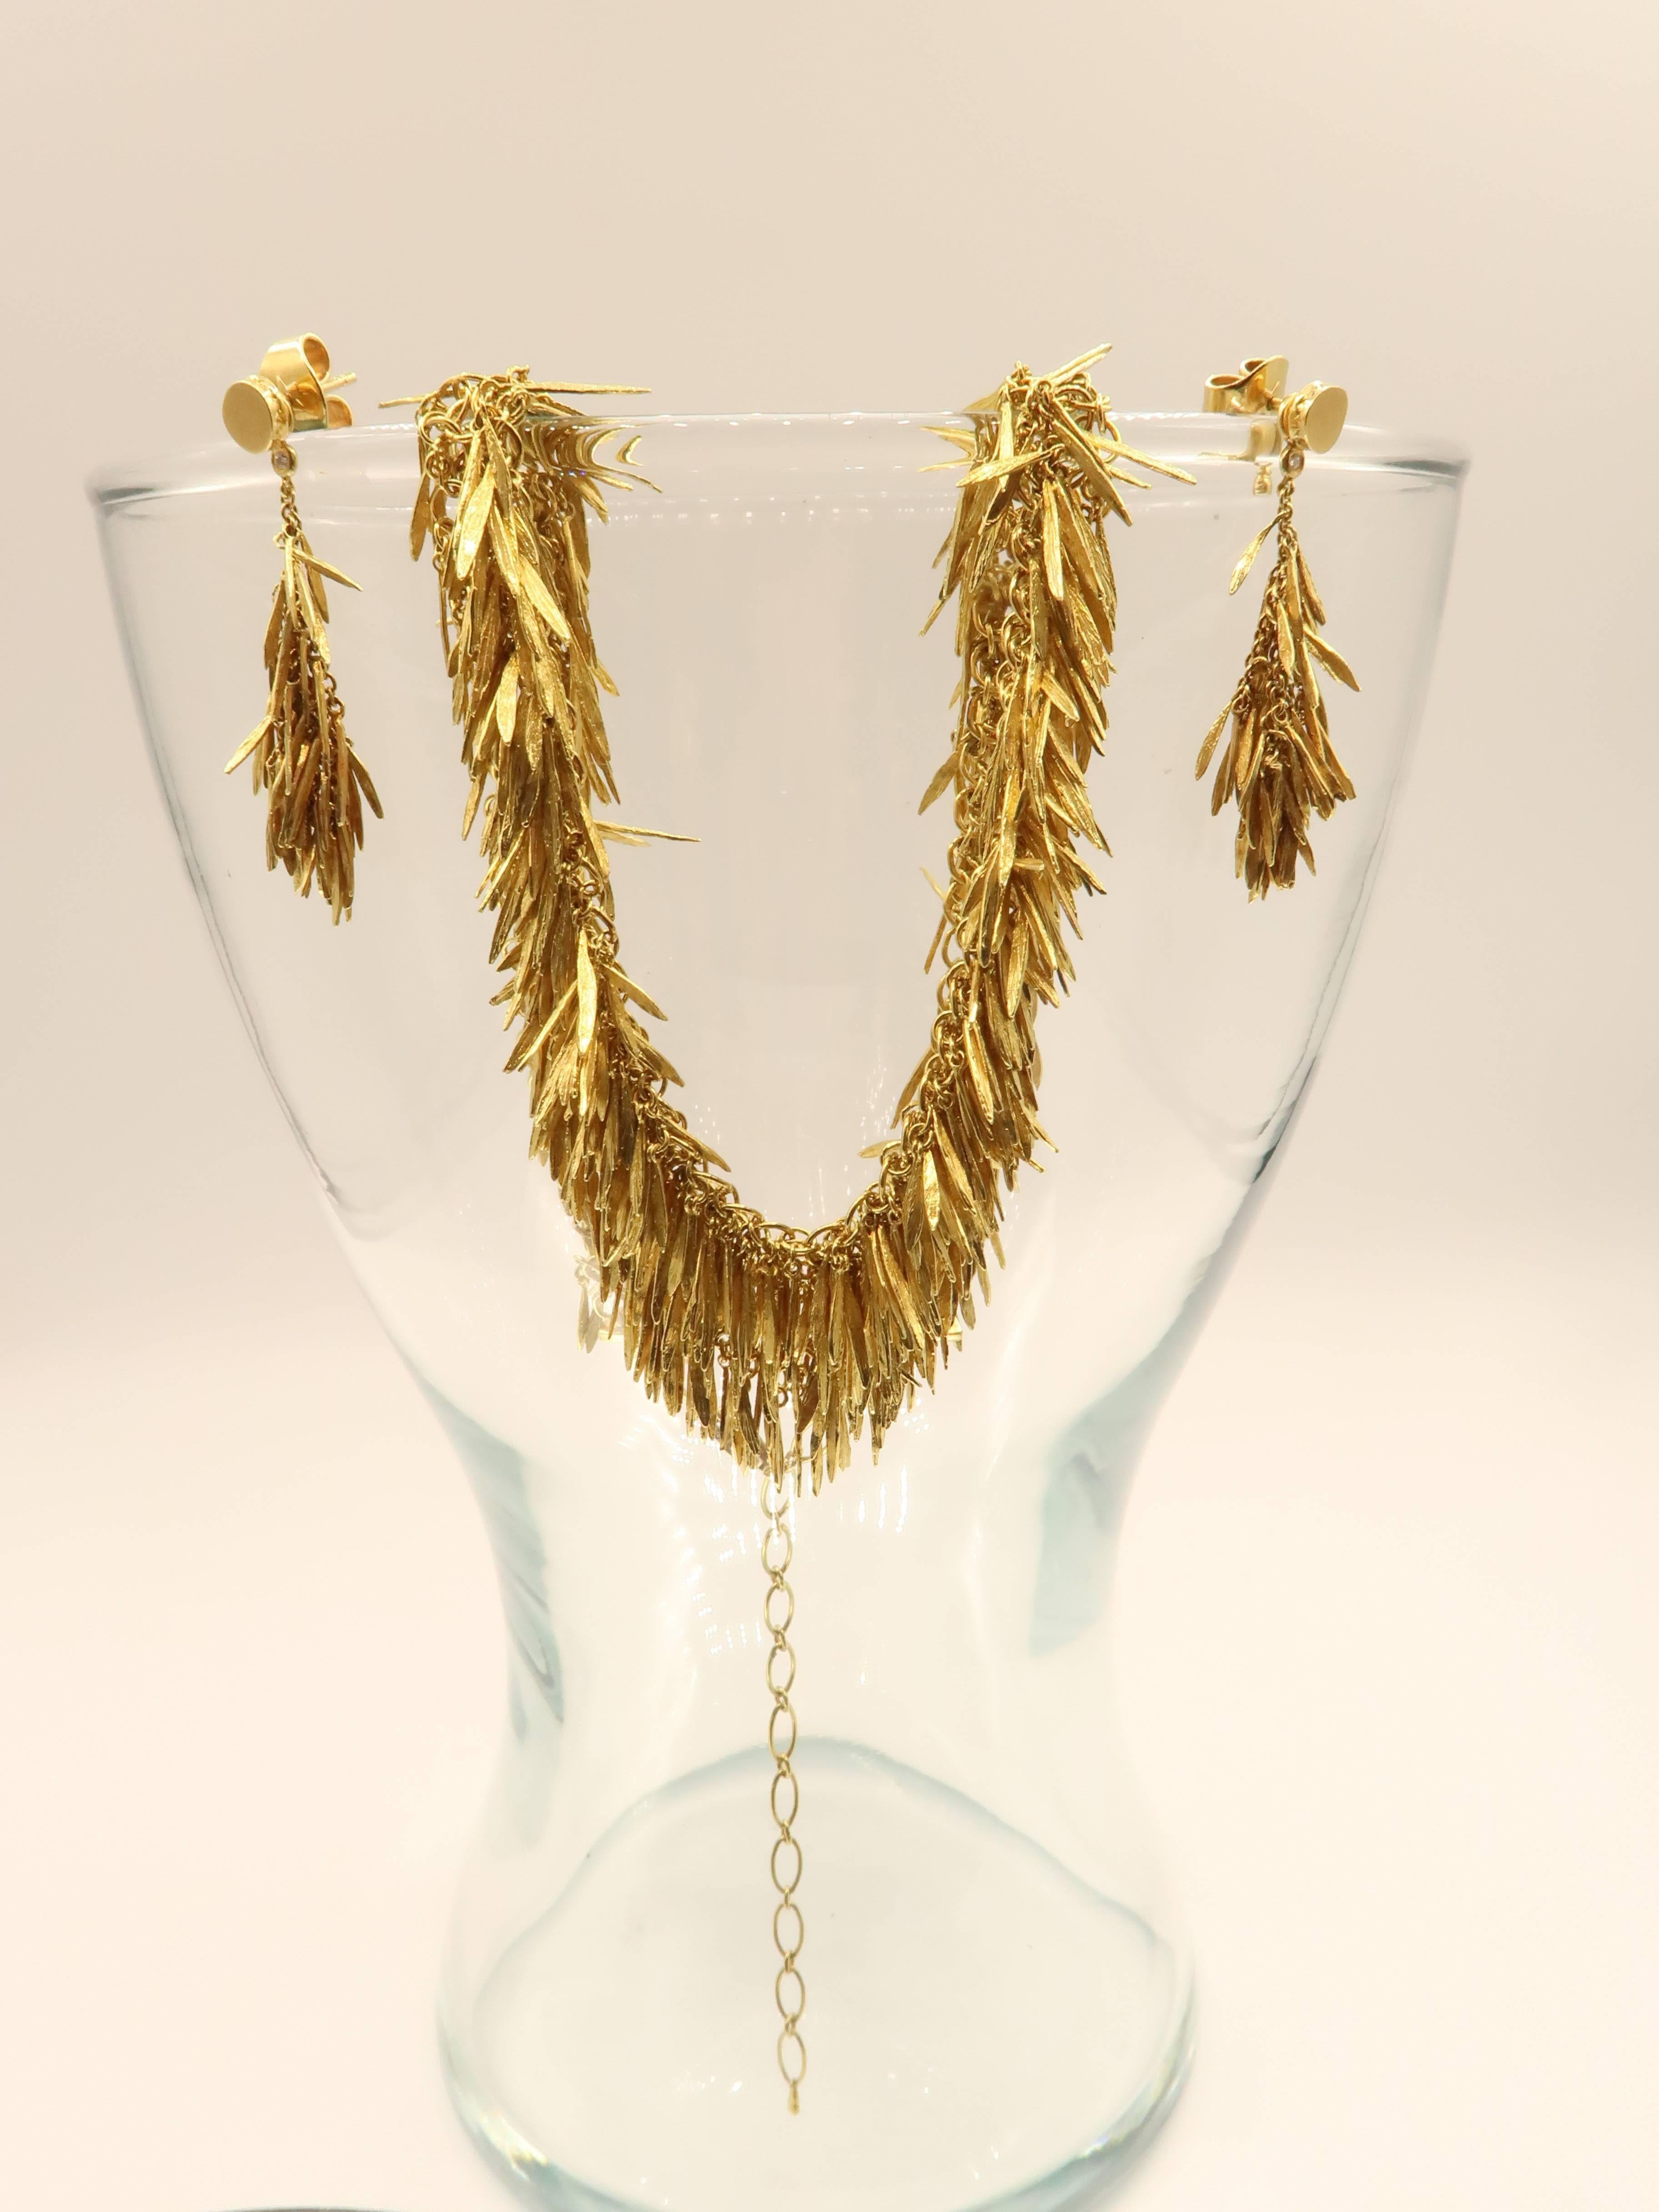 Individual handcrafted feather motifs create the antique golden layered effect for this exceptional H. Stern necklace and earrings set. Feathers are entirely made by hands and linked to the chain.

H. Stern Feathers Brushed Gold Necklace
Gold :